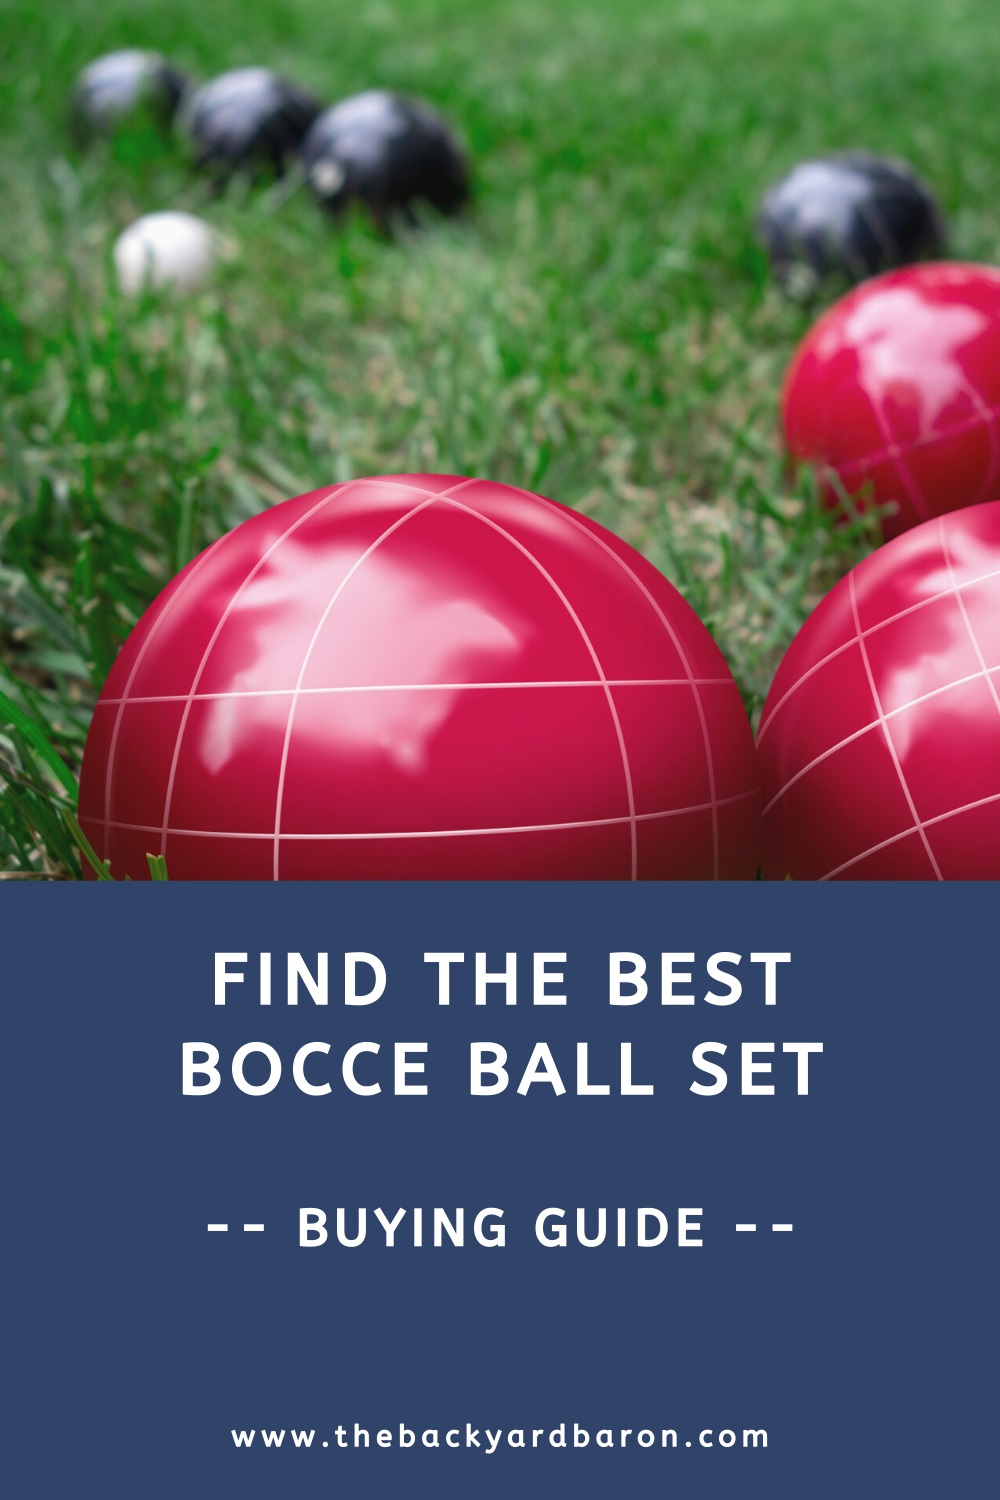 Bocce ball set buying guide